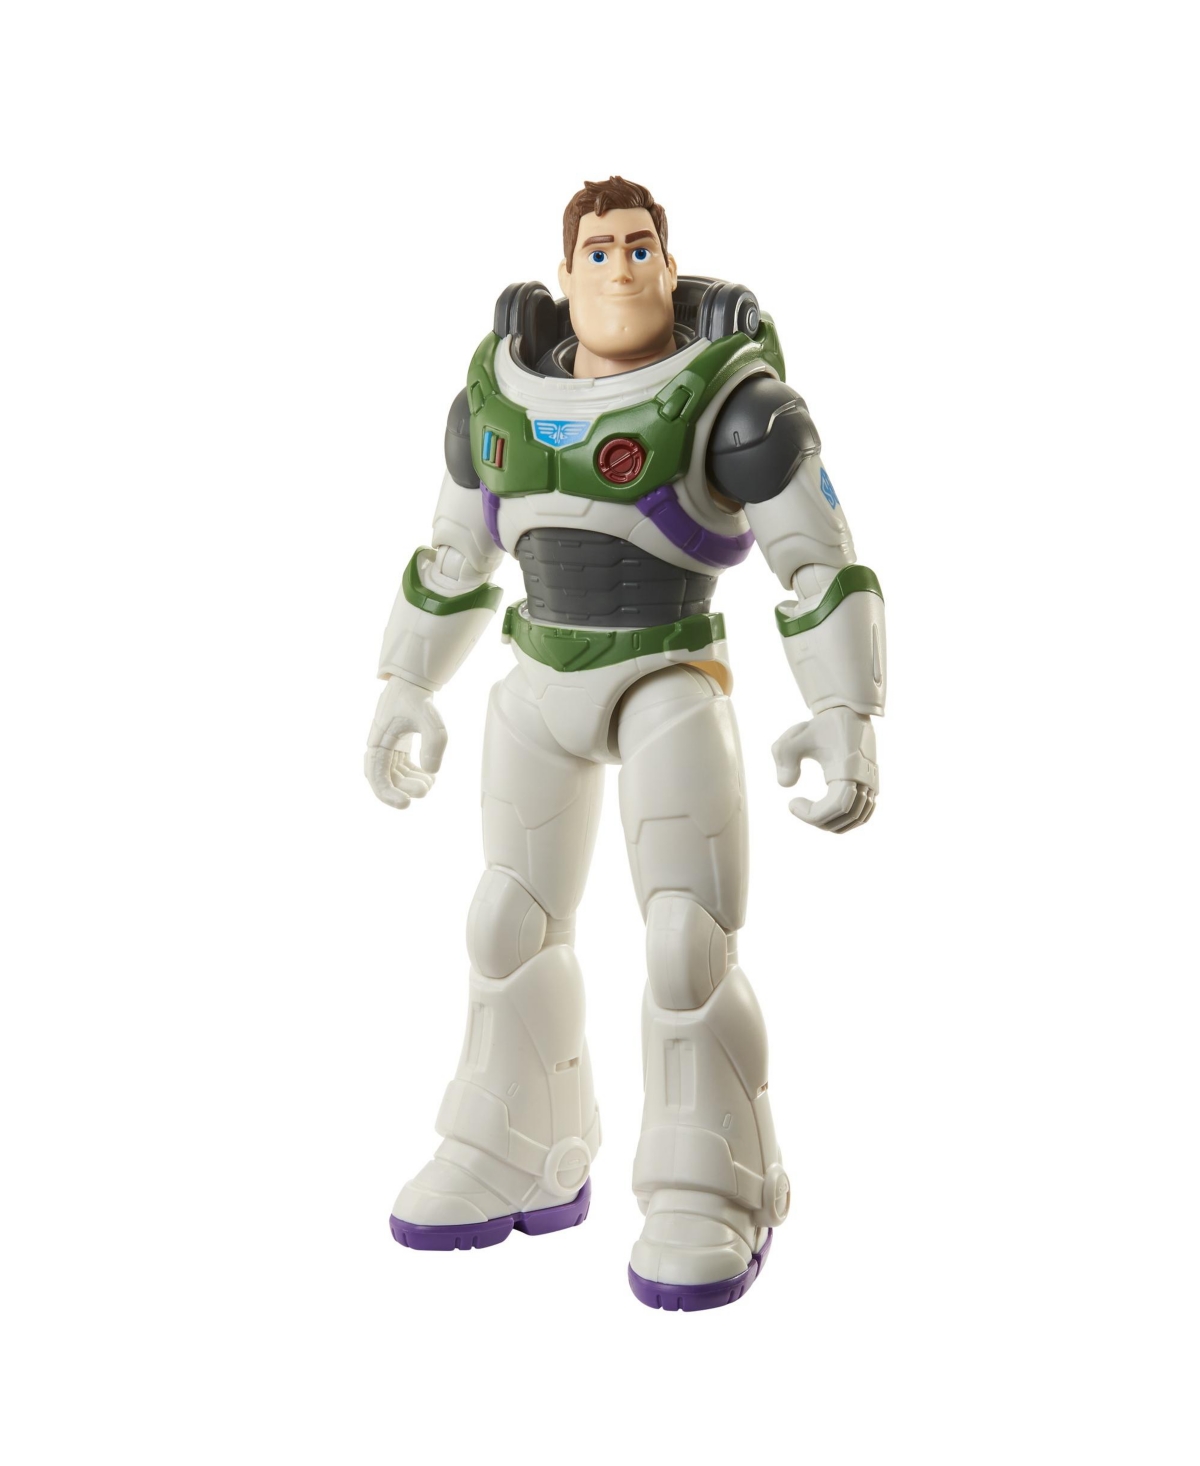 Disney Pixar Toy Story 4 Buzz Lightyear Poseable Action Figure 9” New Limited 